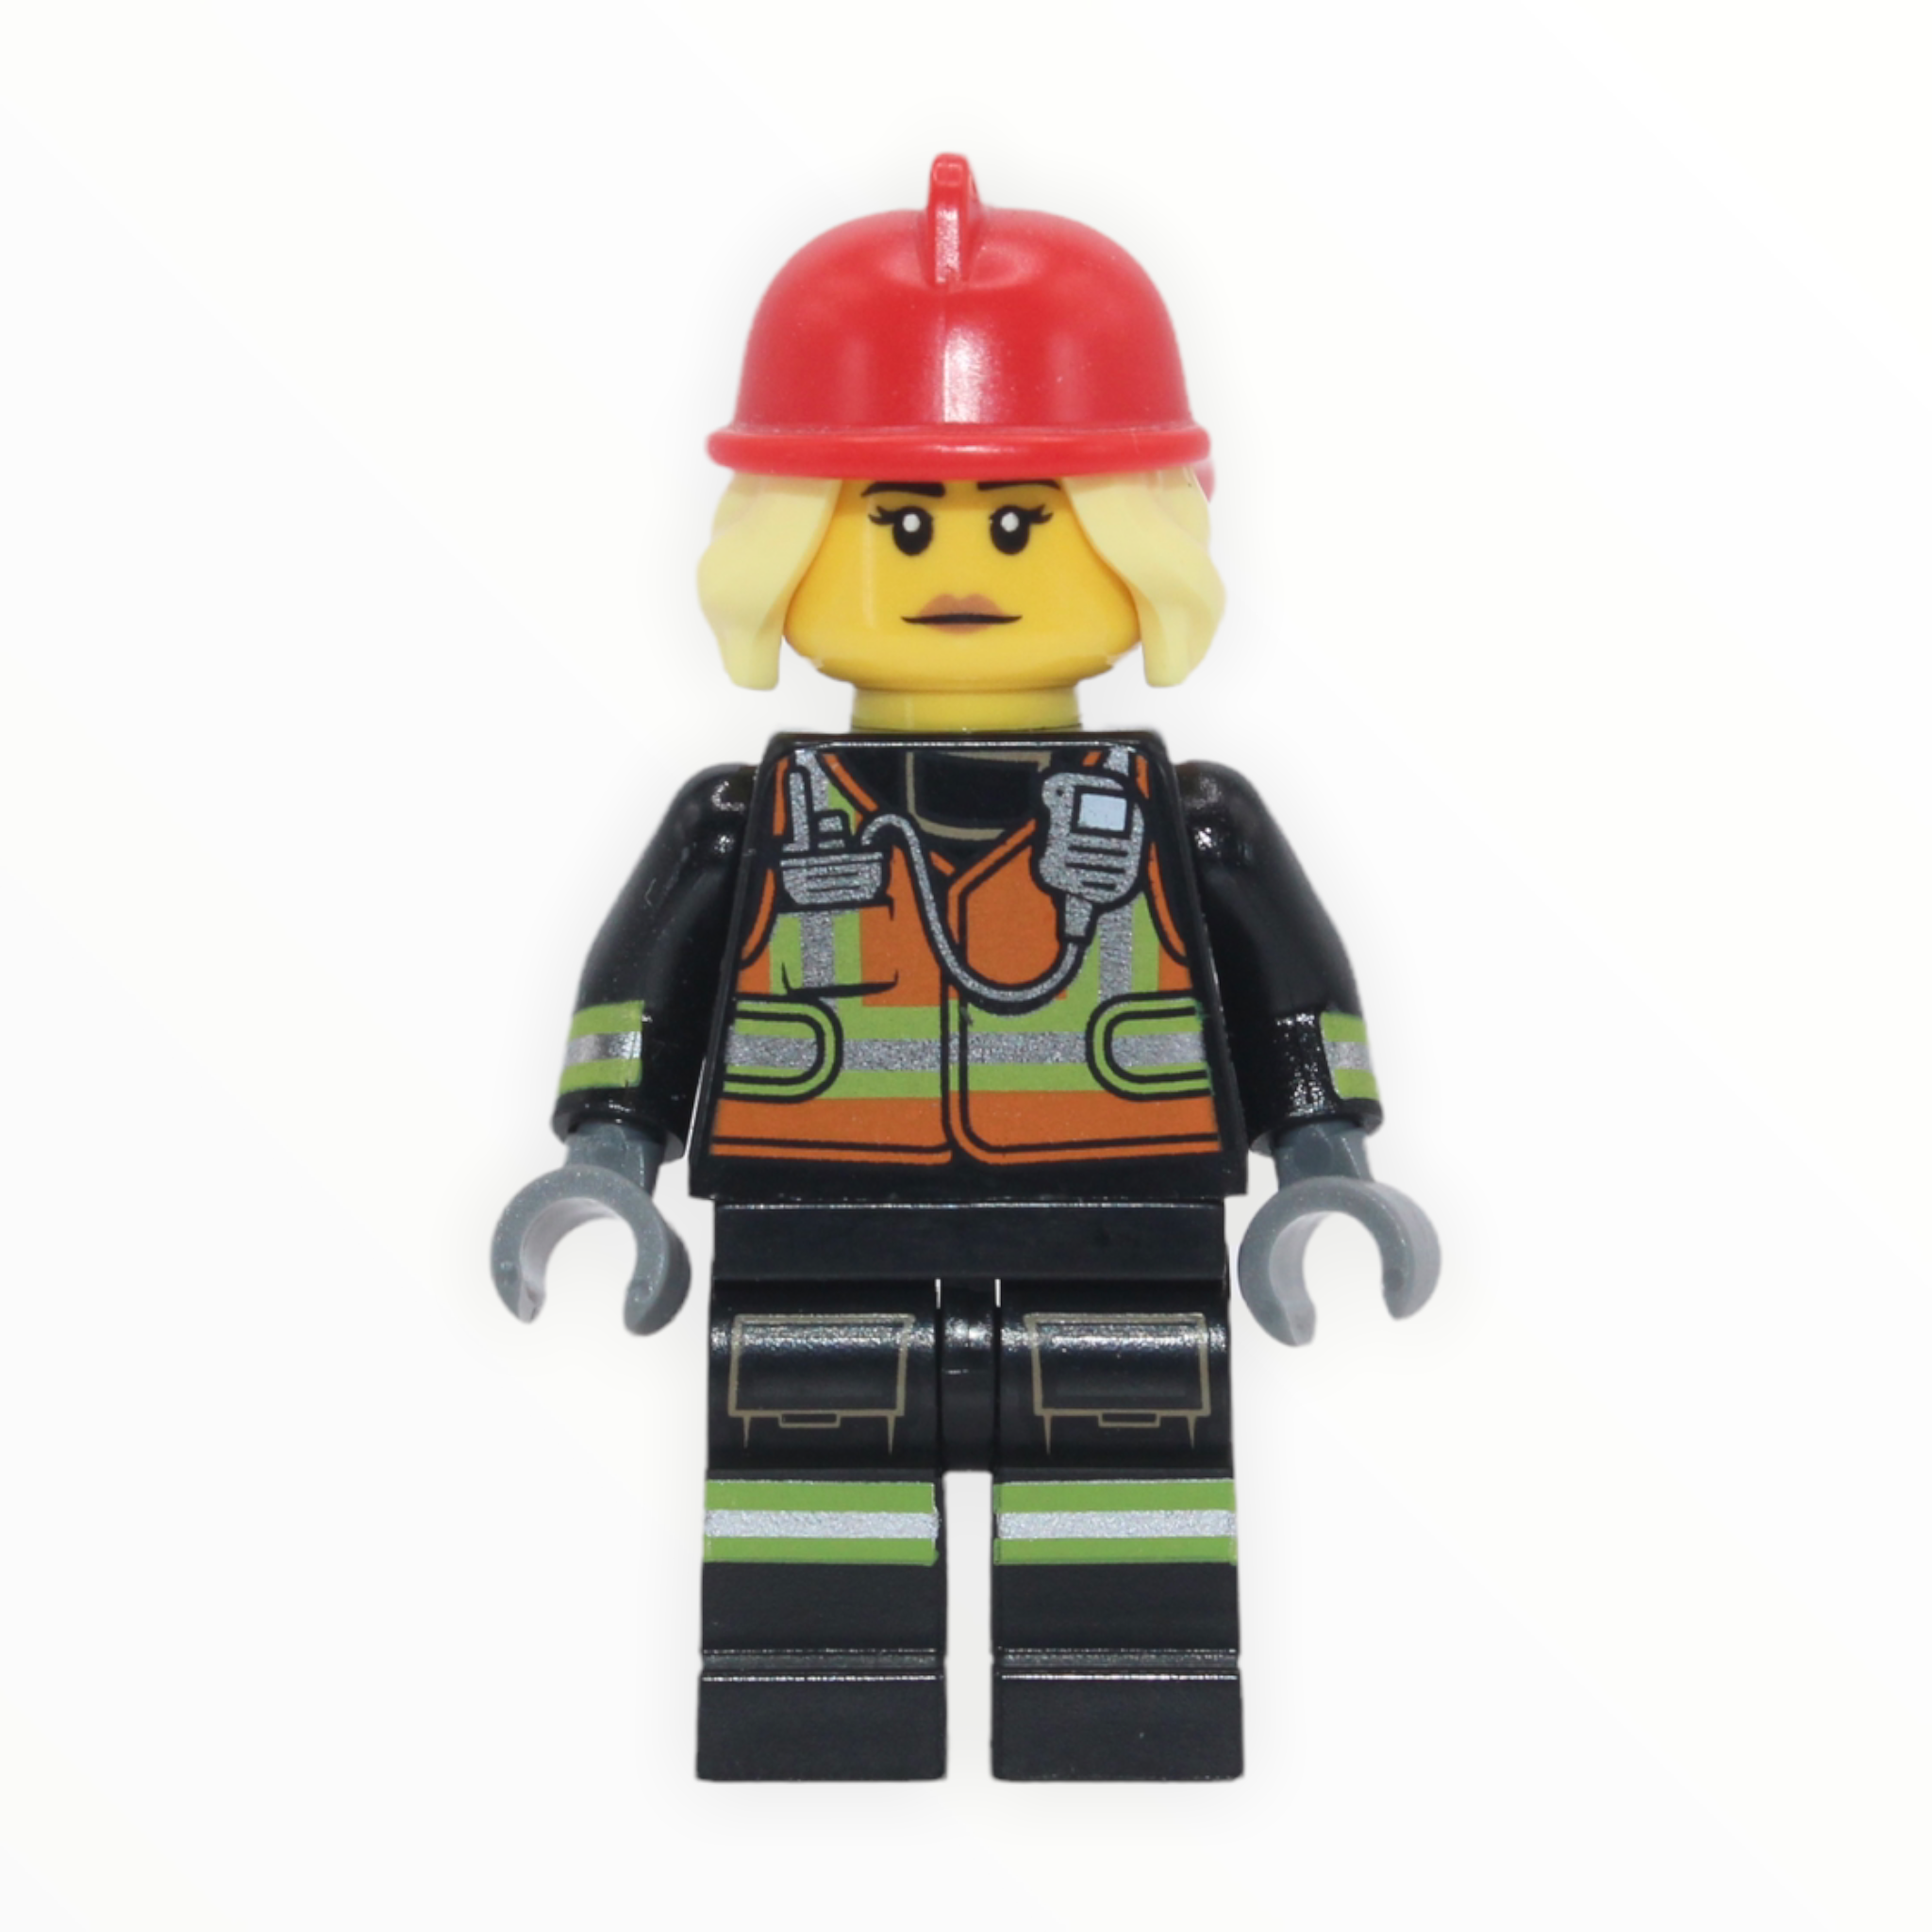 LEGO Series 19: Fire Fighter